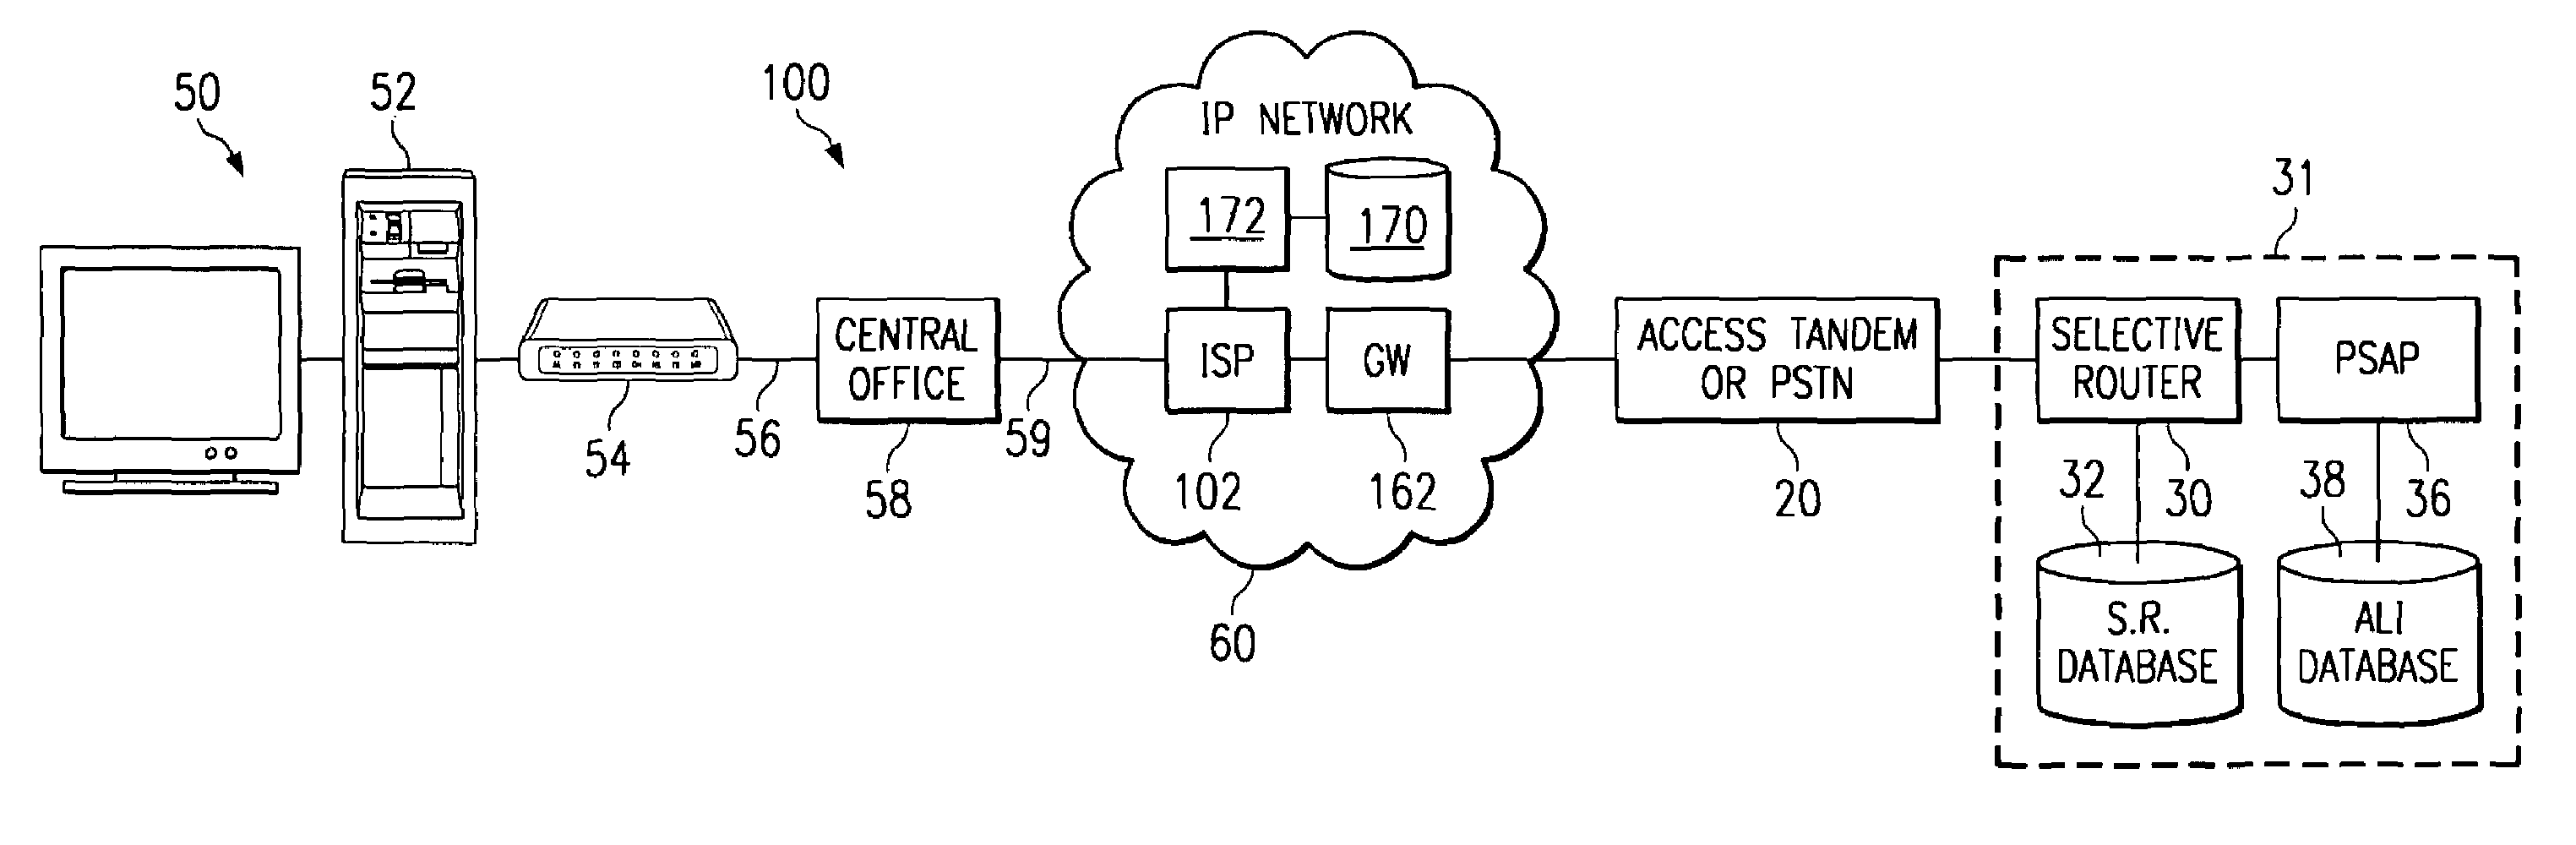 Methods and system for routing emergency calls through the internet